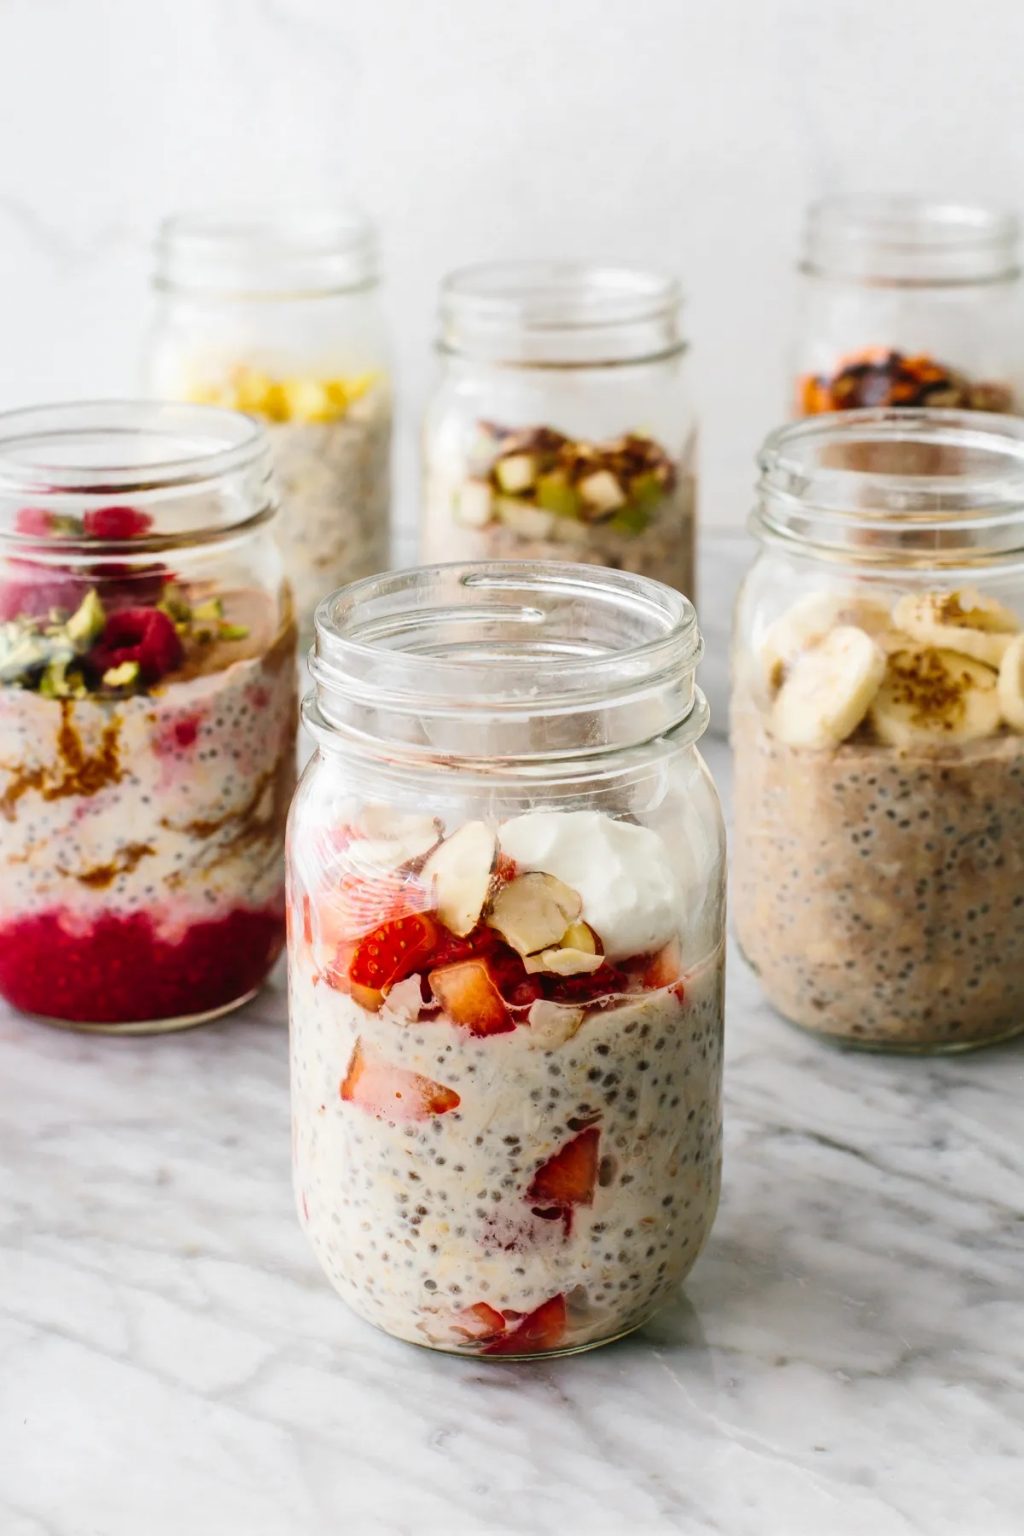 10 Easy Overnight Oats Recipes That’ll Give You a Reason to Get Up